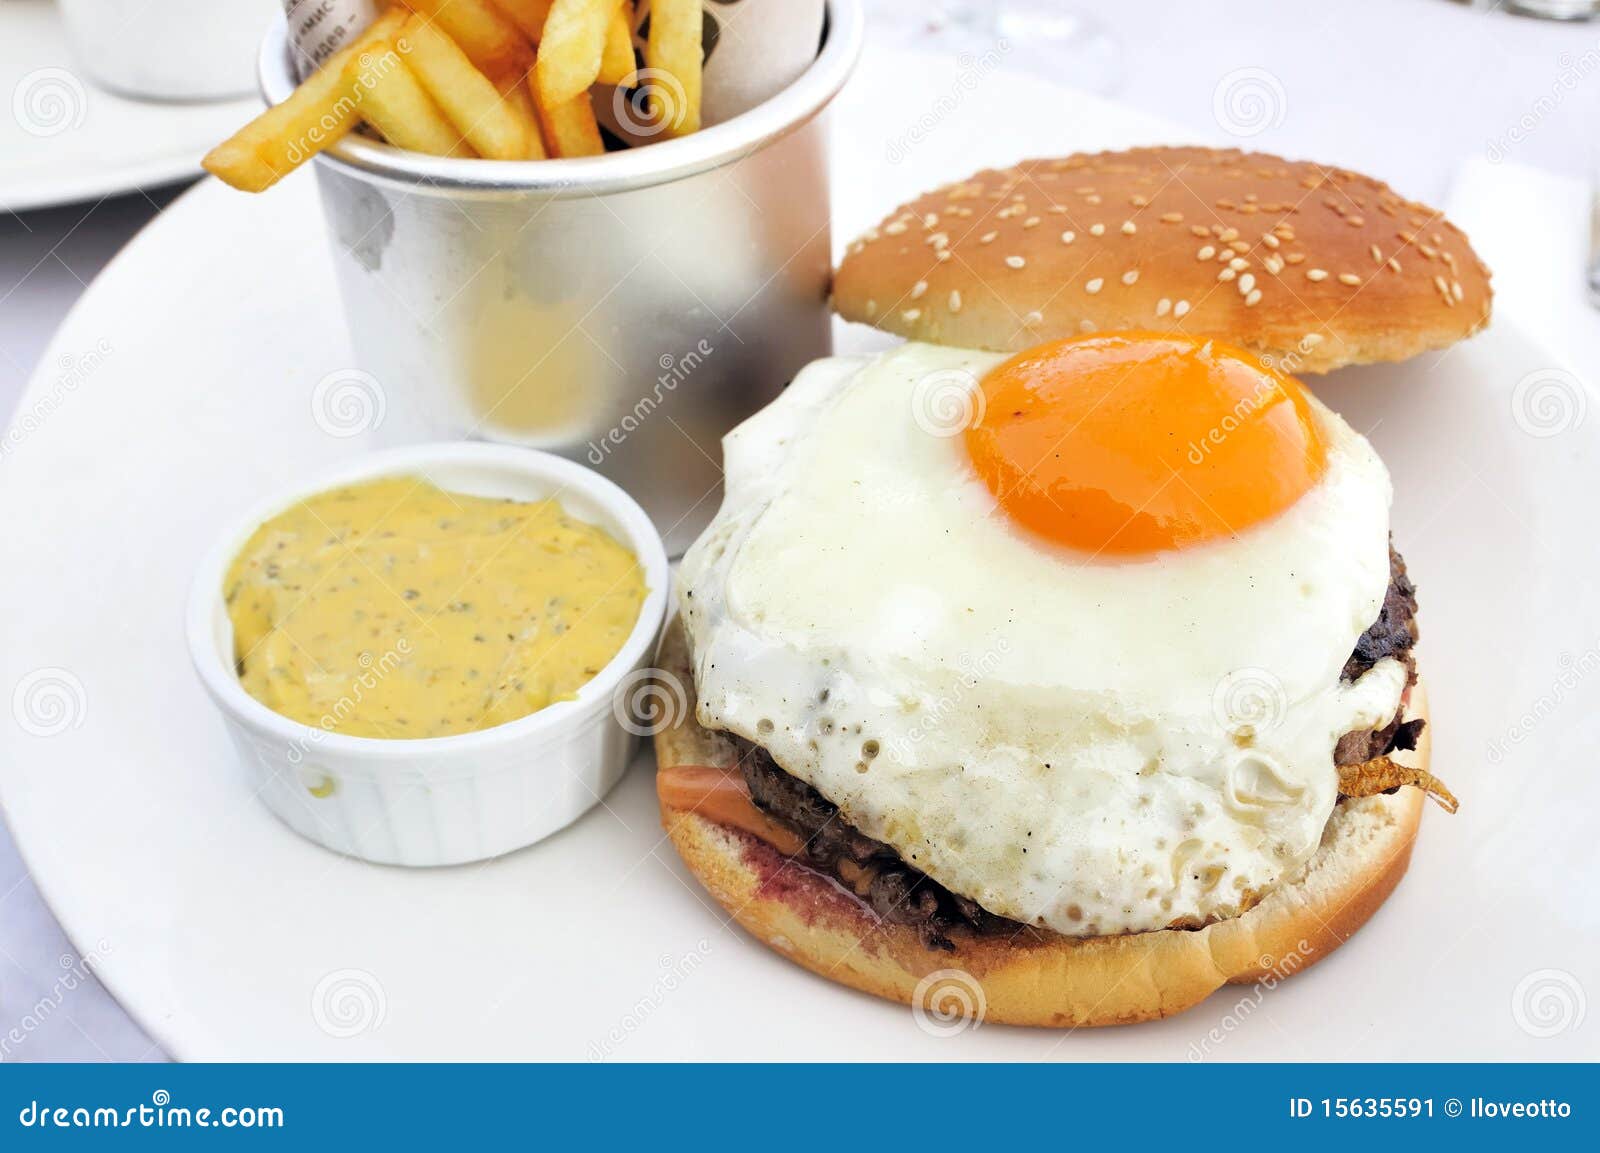 American burger stock image. Image of potatoes, delicious - 15635591